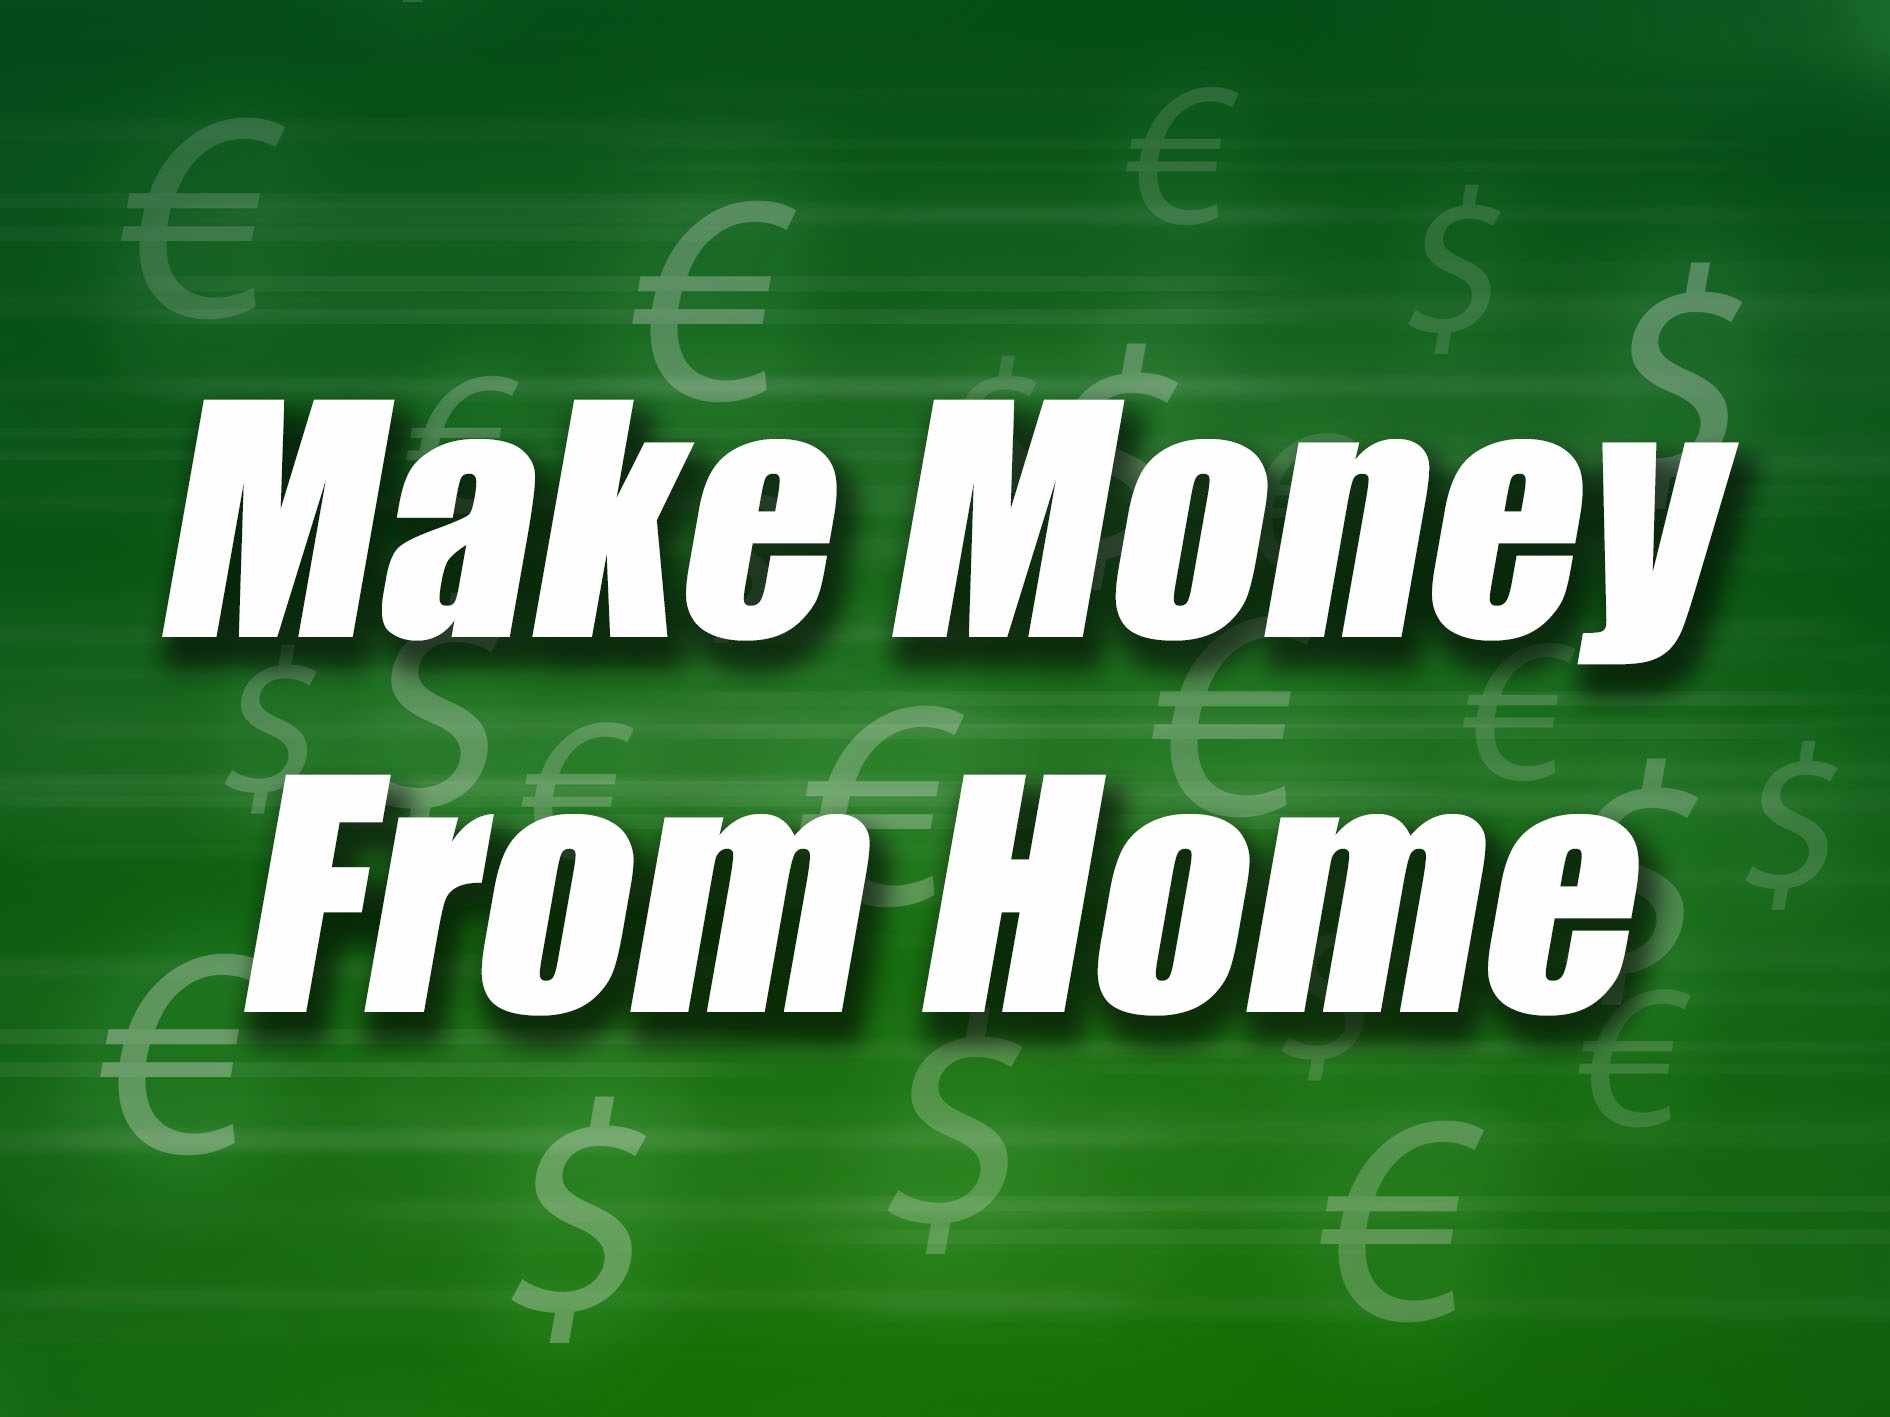 Five Ways to Make Money from Home – July 2021